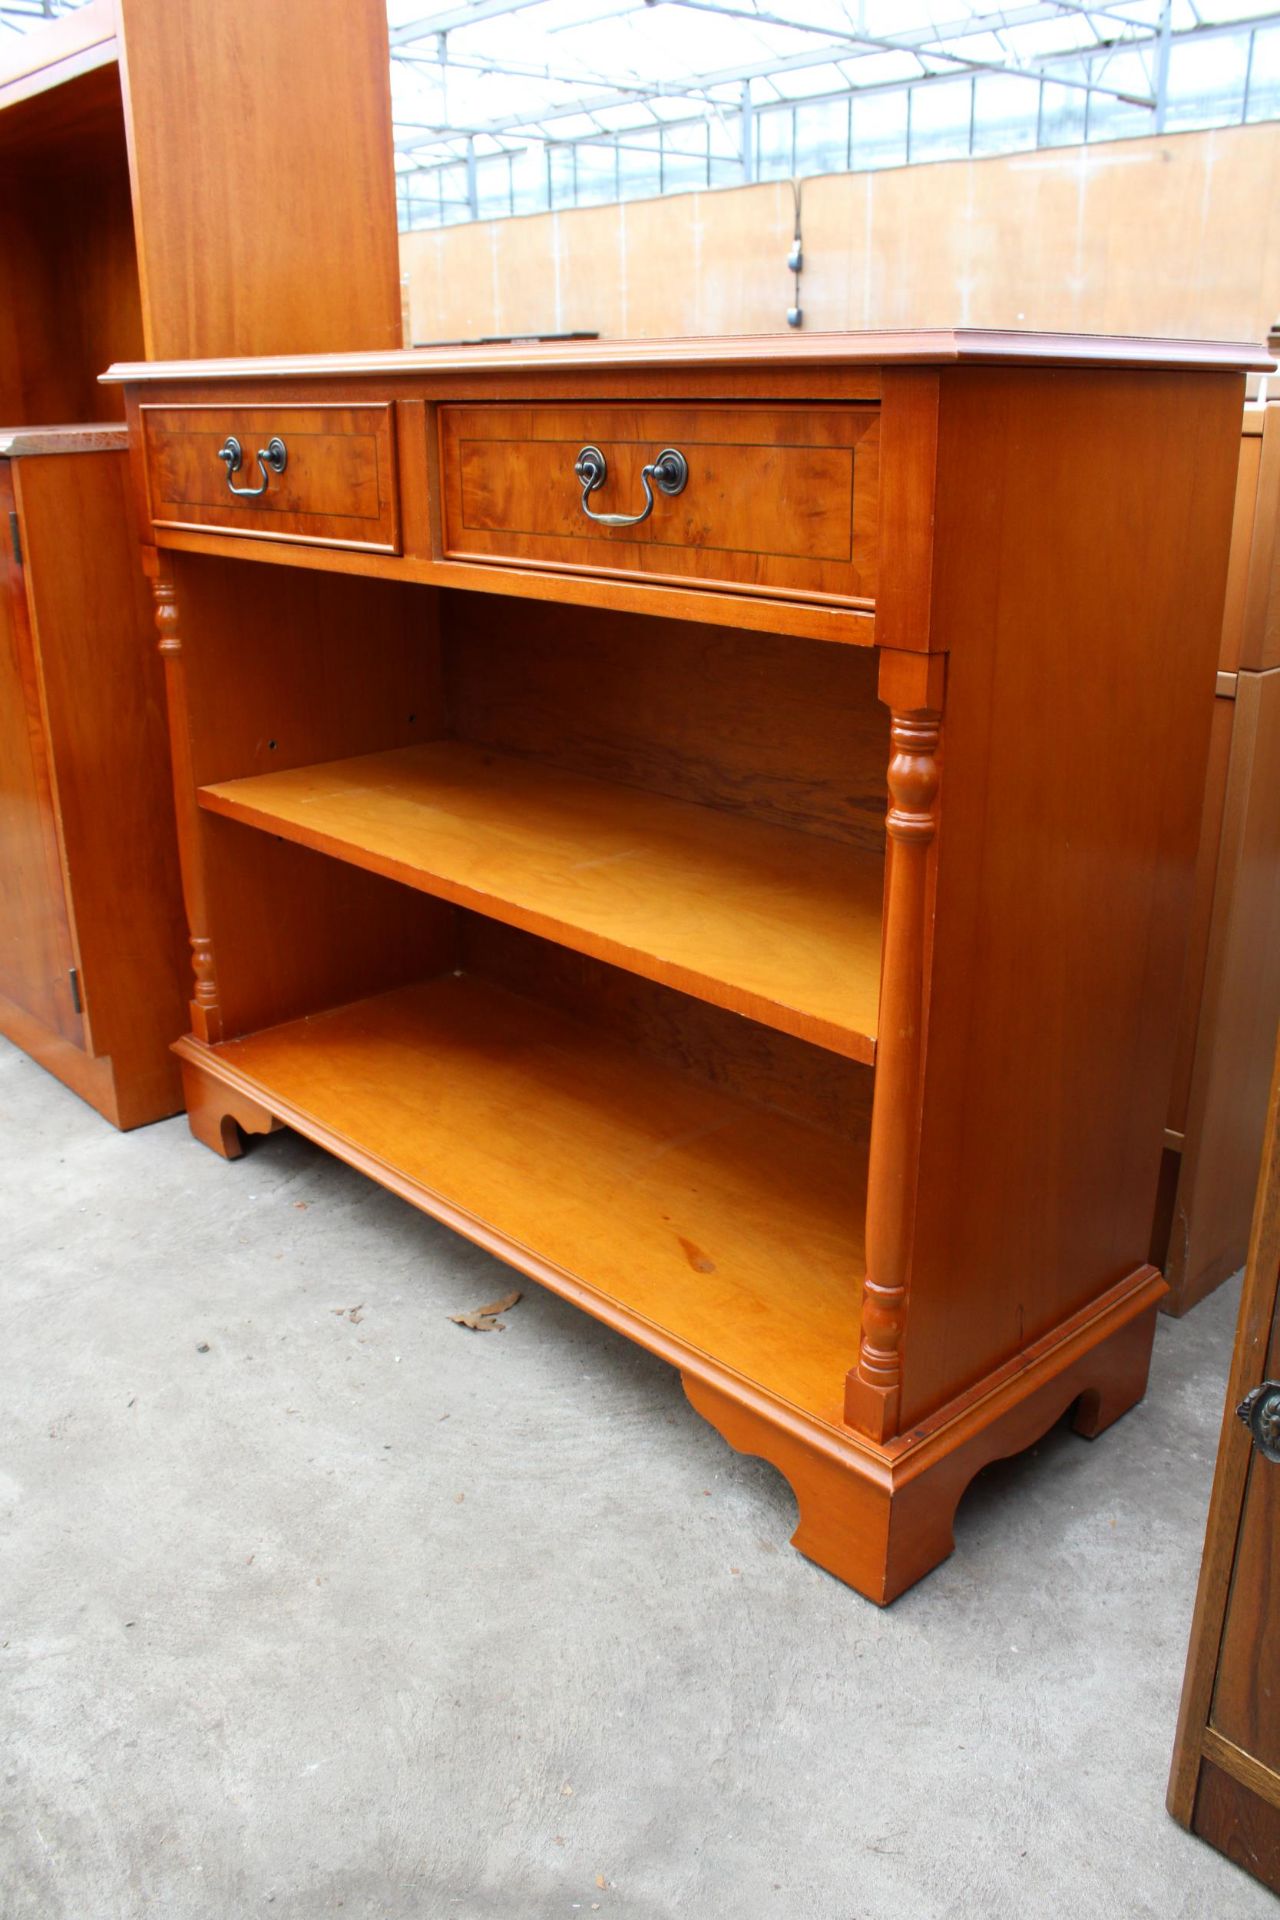 A MODERN YEW WOOD CONSOLE TABLE WITH TWO FRIEZE DRAWERS, 40" WIDE - Image 2 of 4